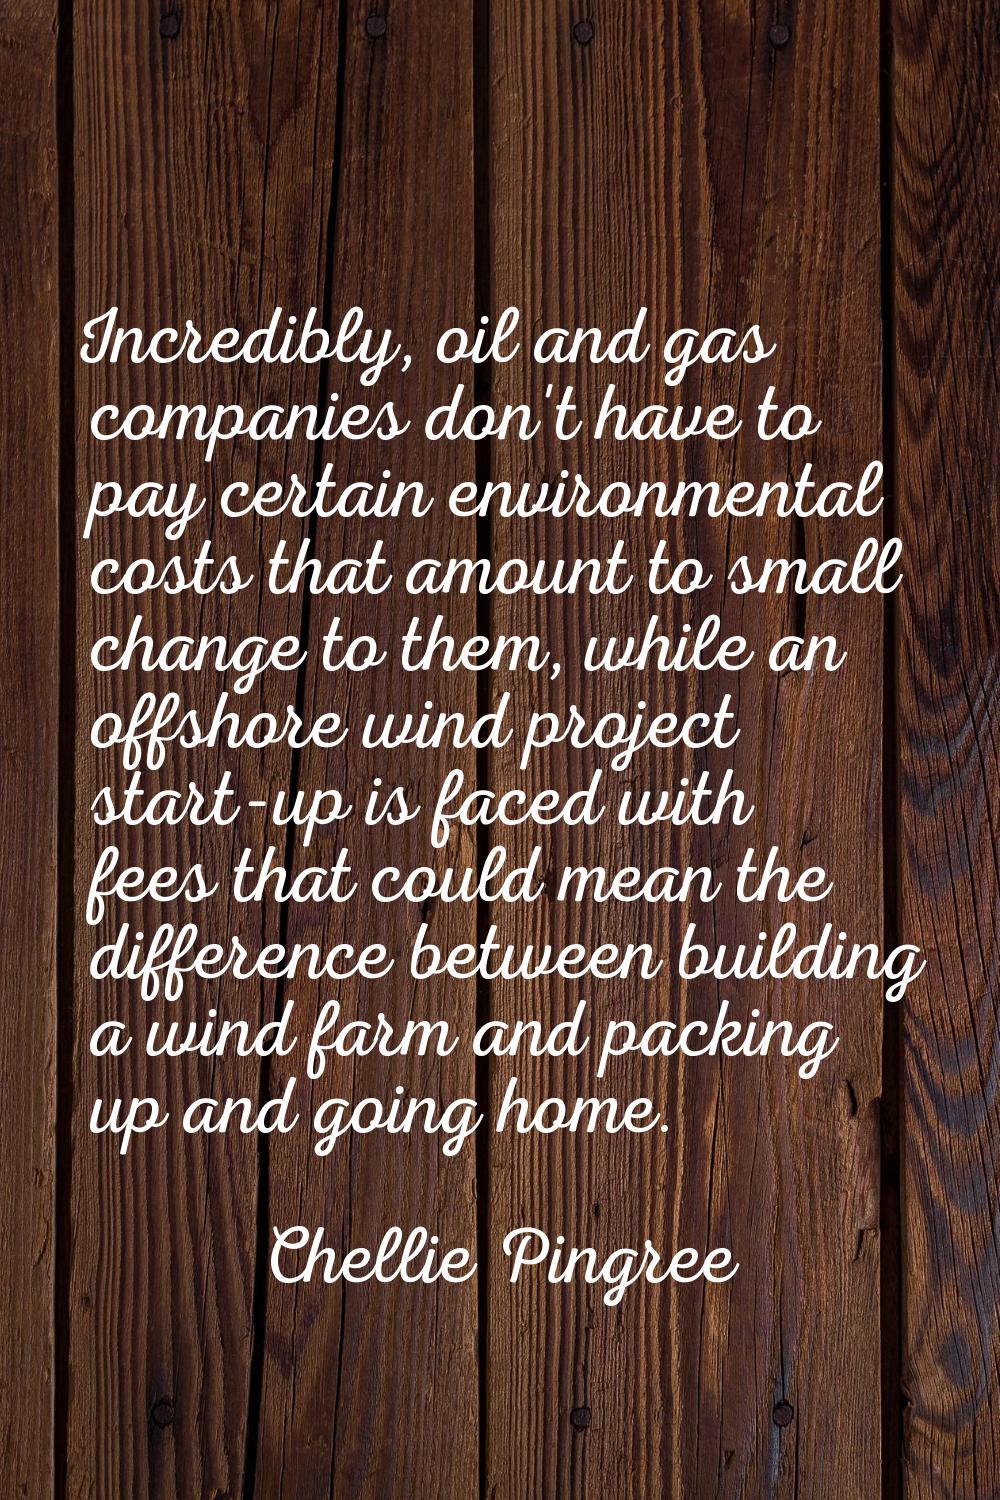 Incredibly, oil and gas companies don't have to pay certain environmental costs that amount to smal